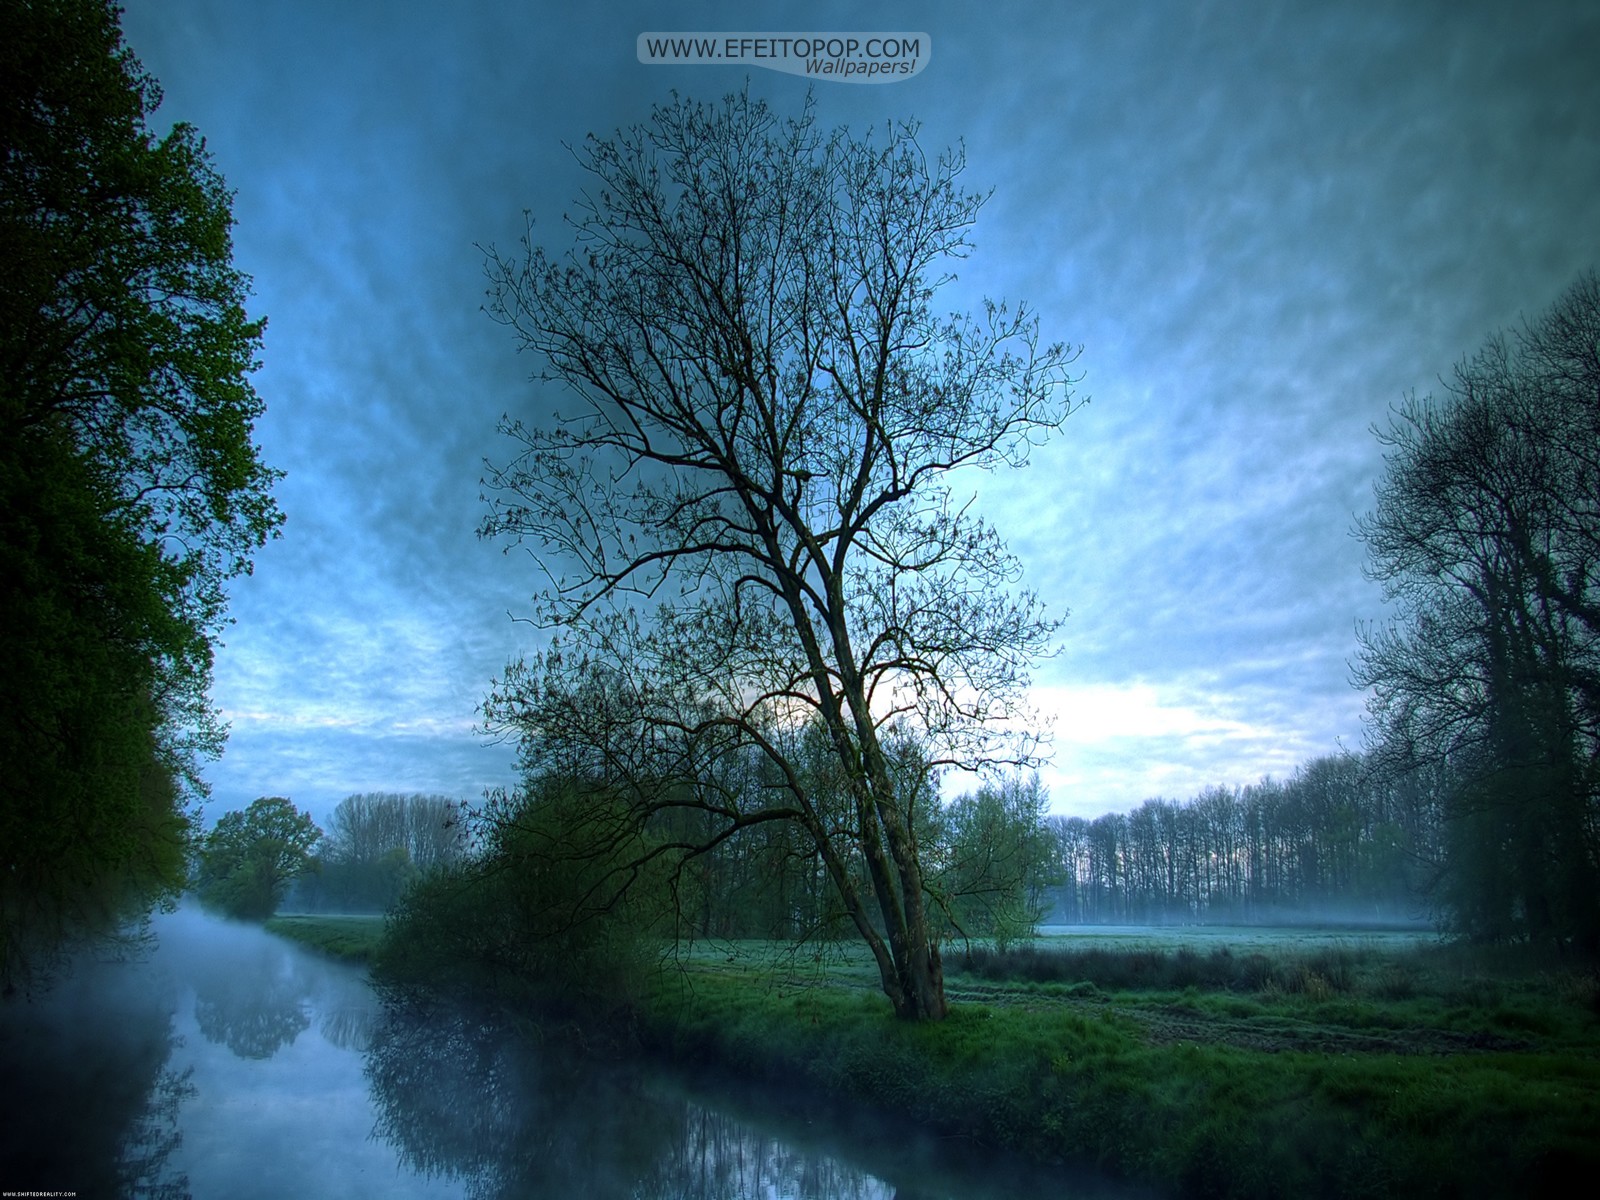 General 1600x1200 water trees landscape nature outdoors canal mist morning watermarked